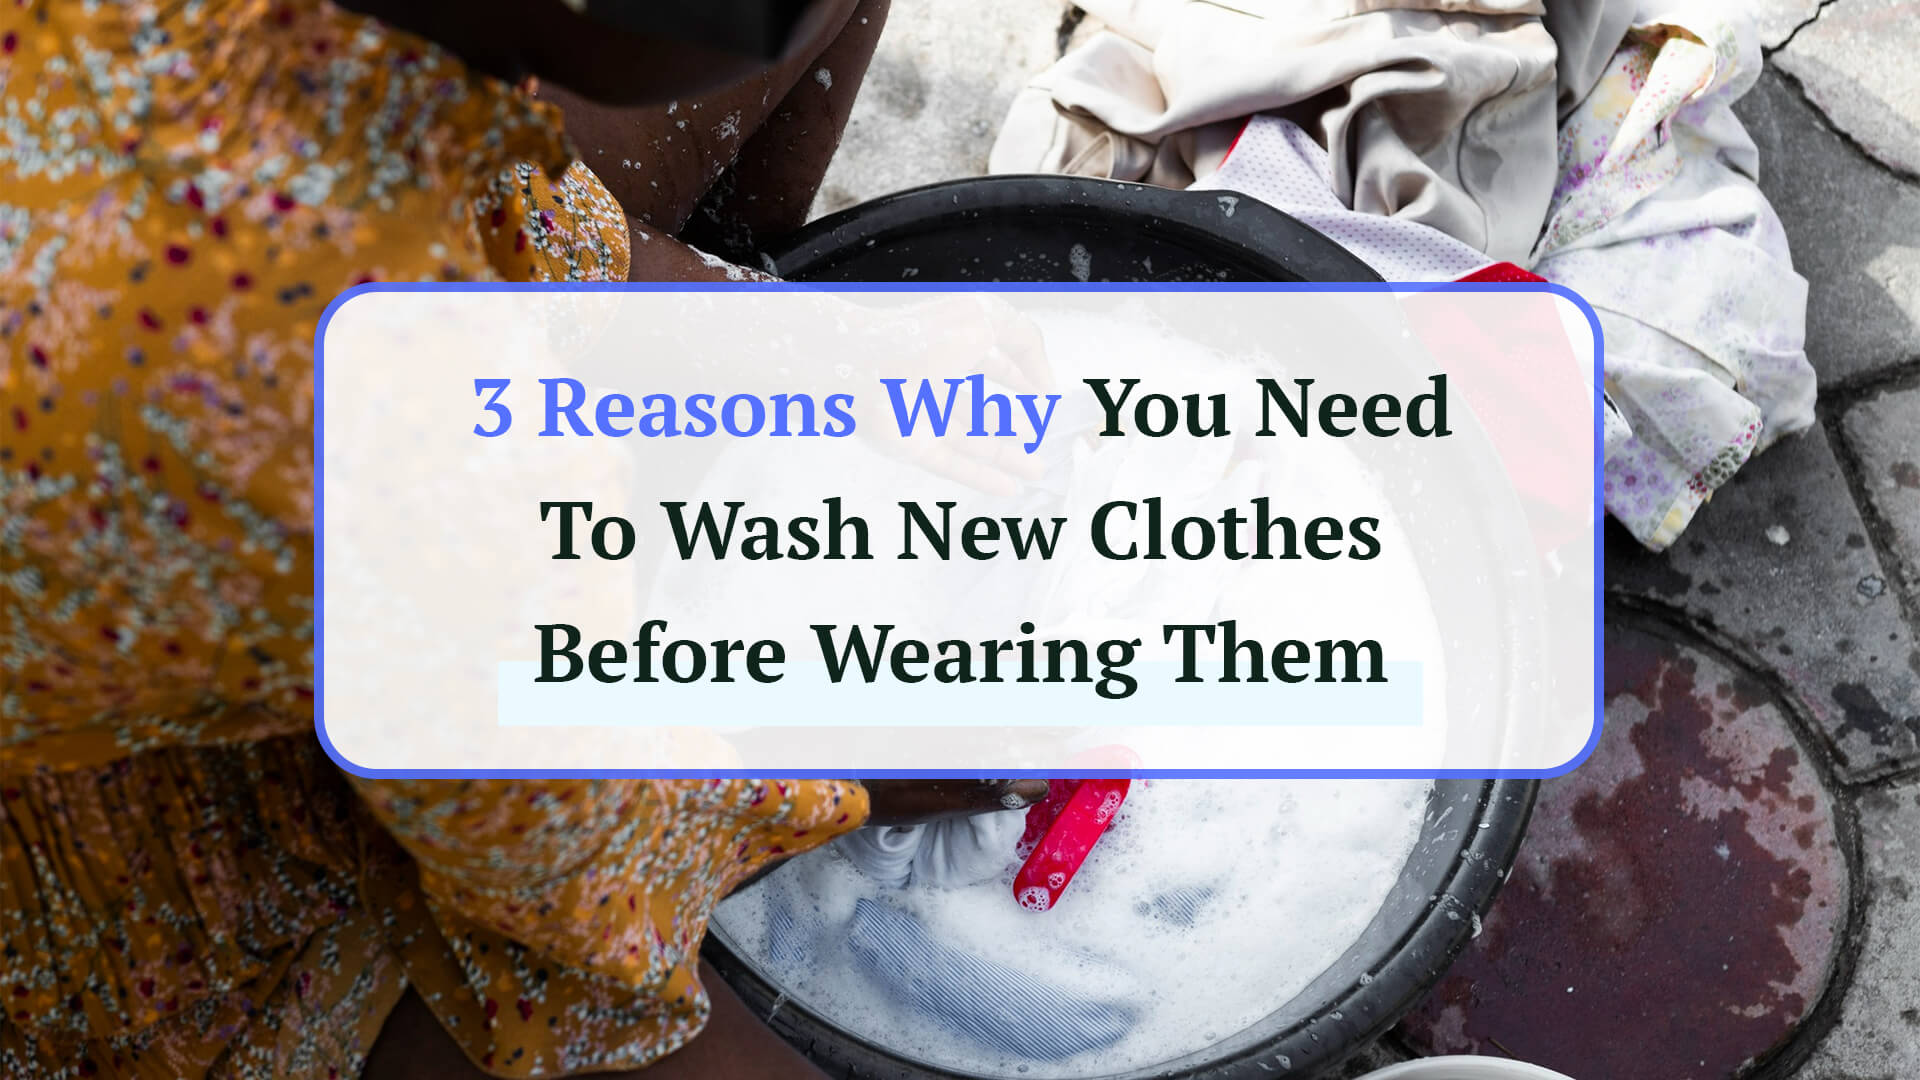 Why we should wash our new clothes before wearing them